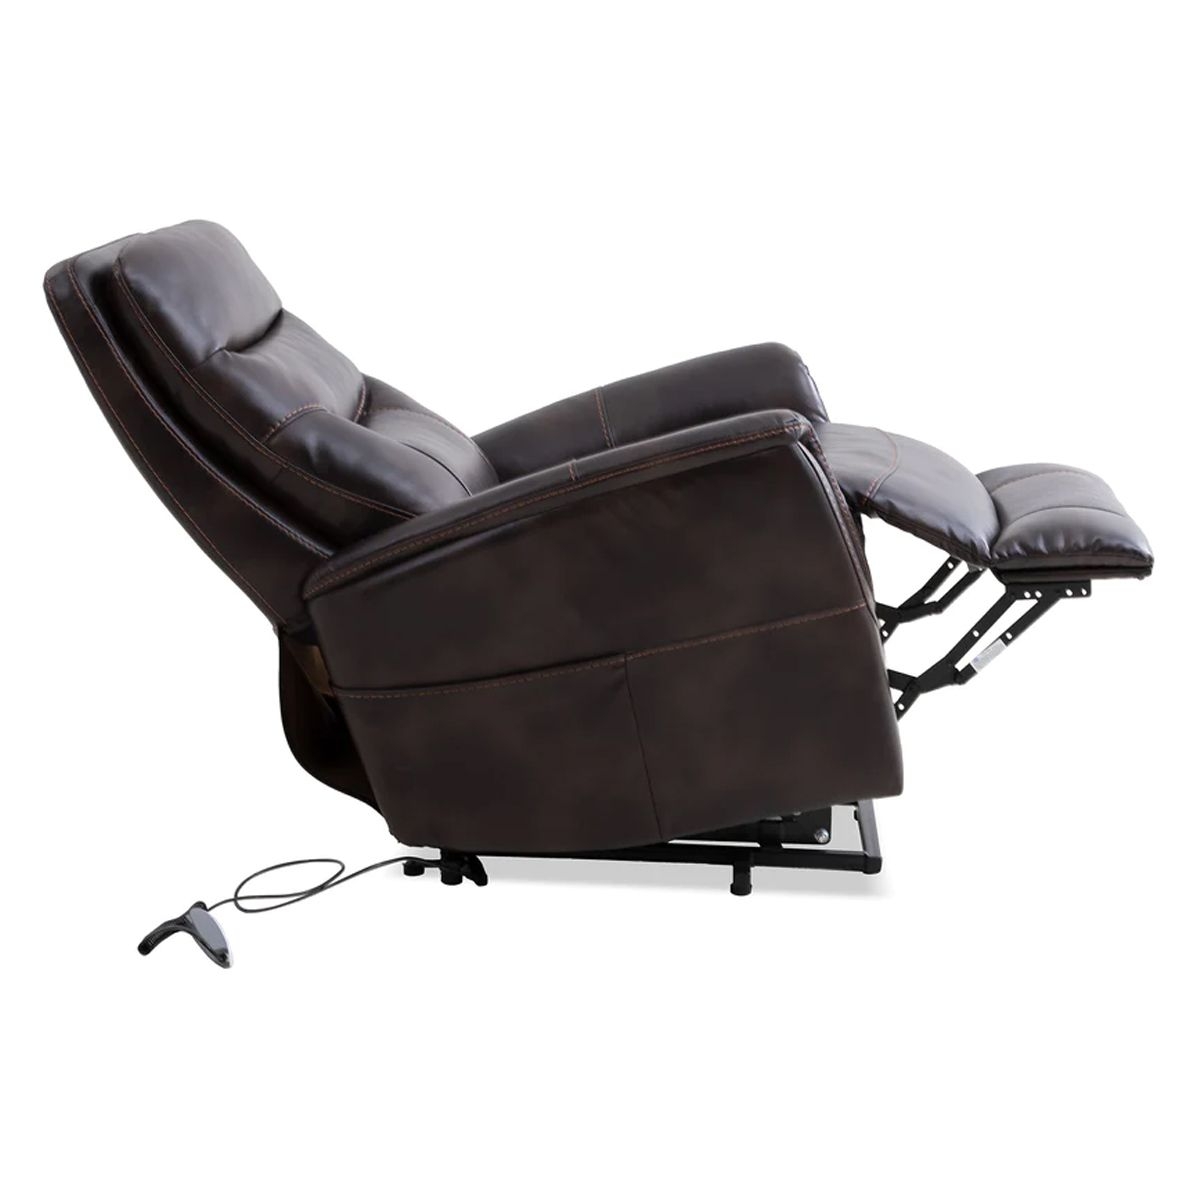 Picture of GEMINI TRUFFLE LIFT RECLINER WITH POWER HEADREST